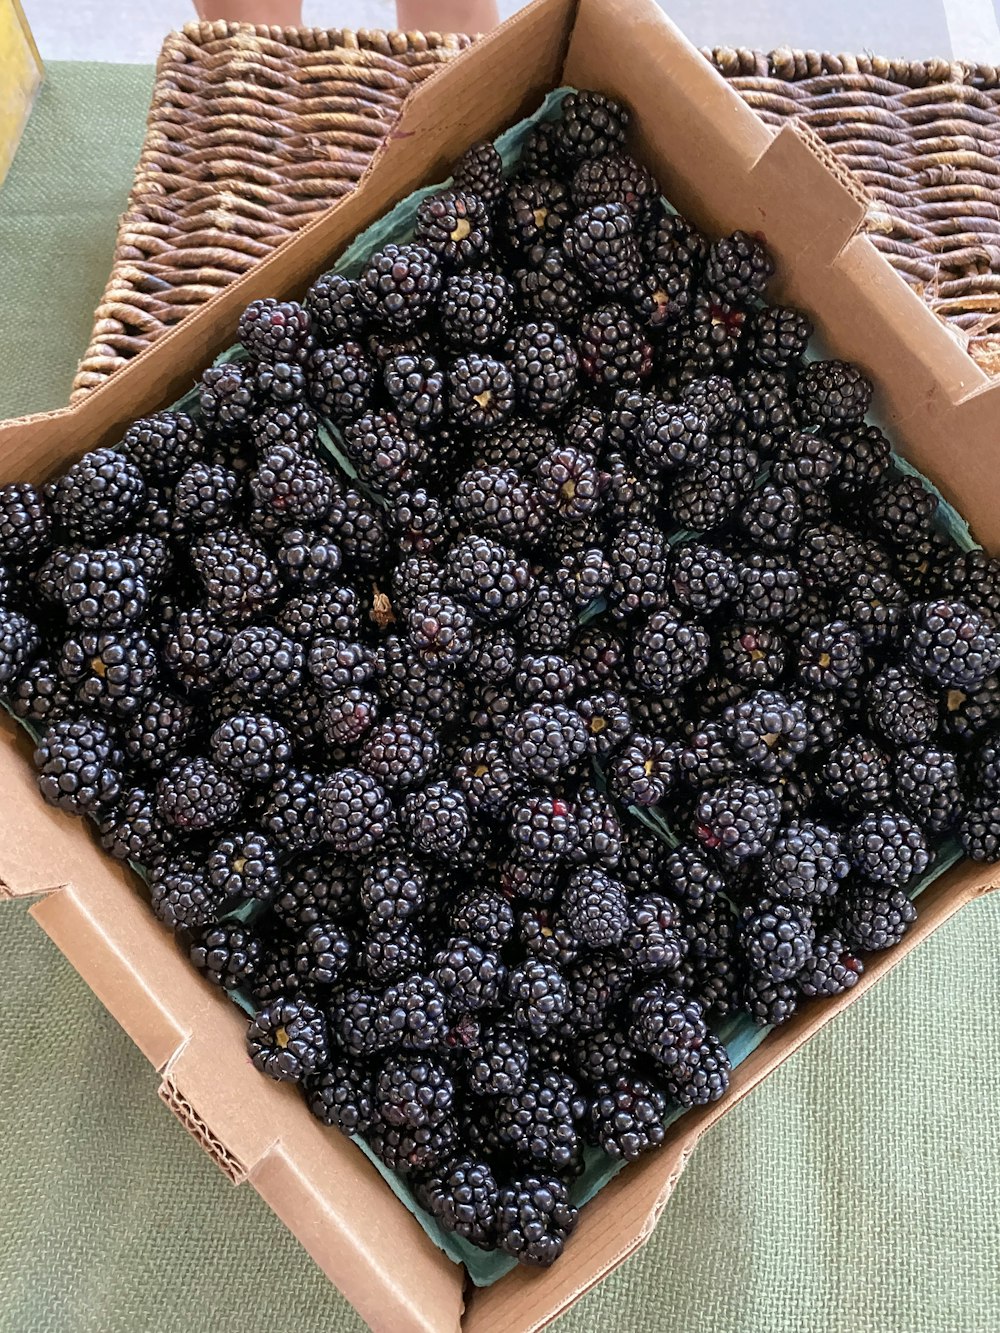 a box filled with blackberries sitting on top of a table